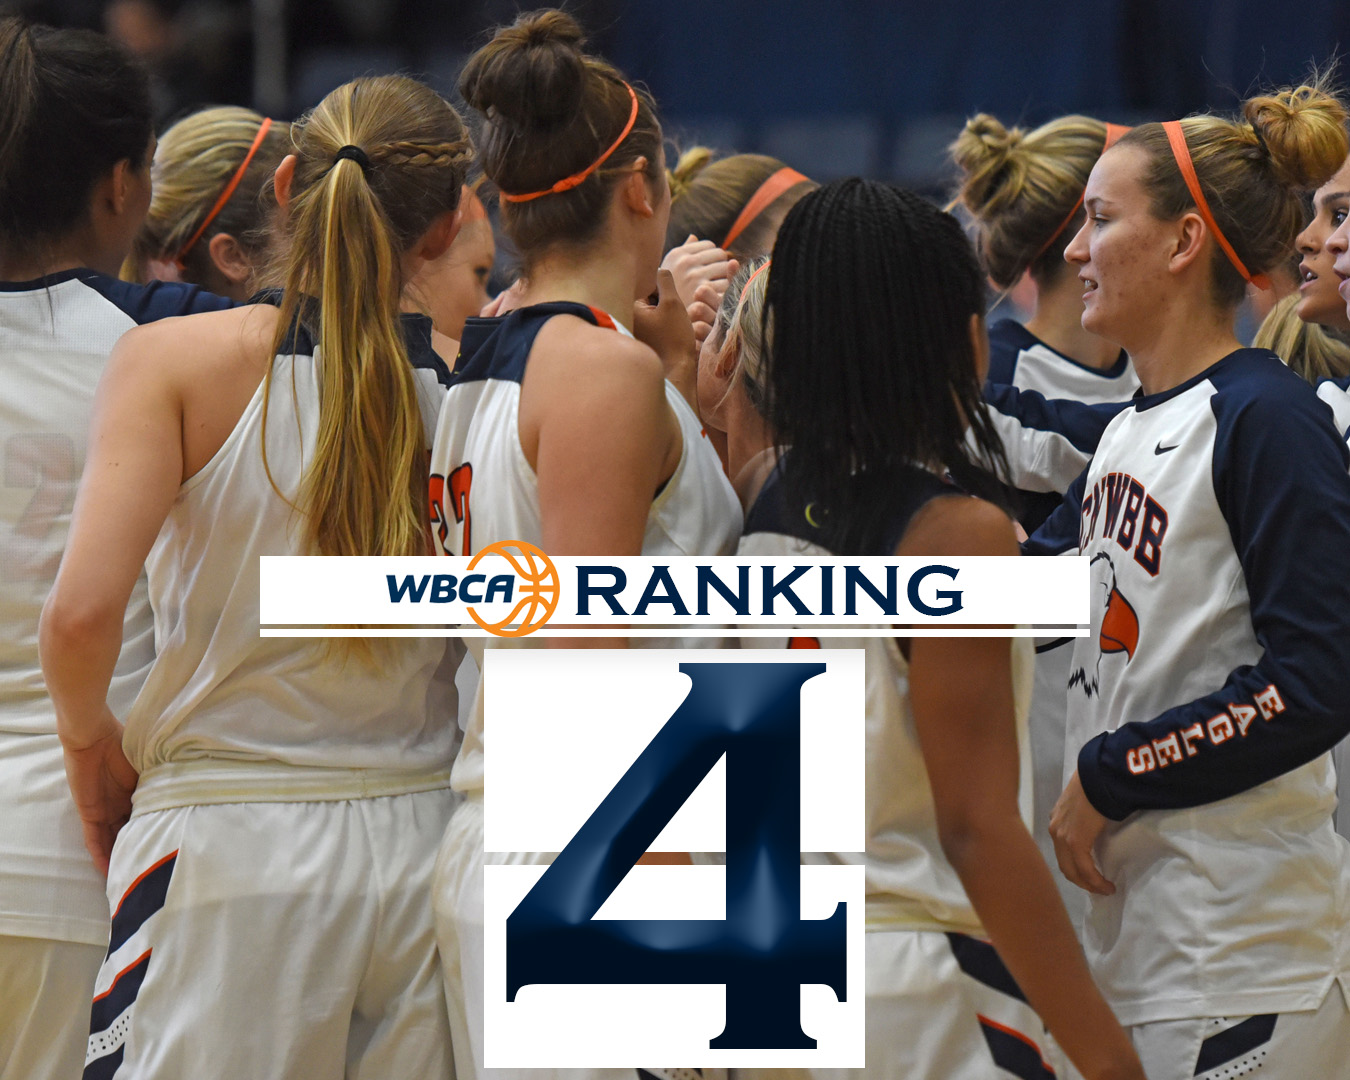 Lady Eagles match SAC’s highest in-season ranking moving to fourth in WBCA poll